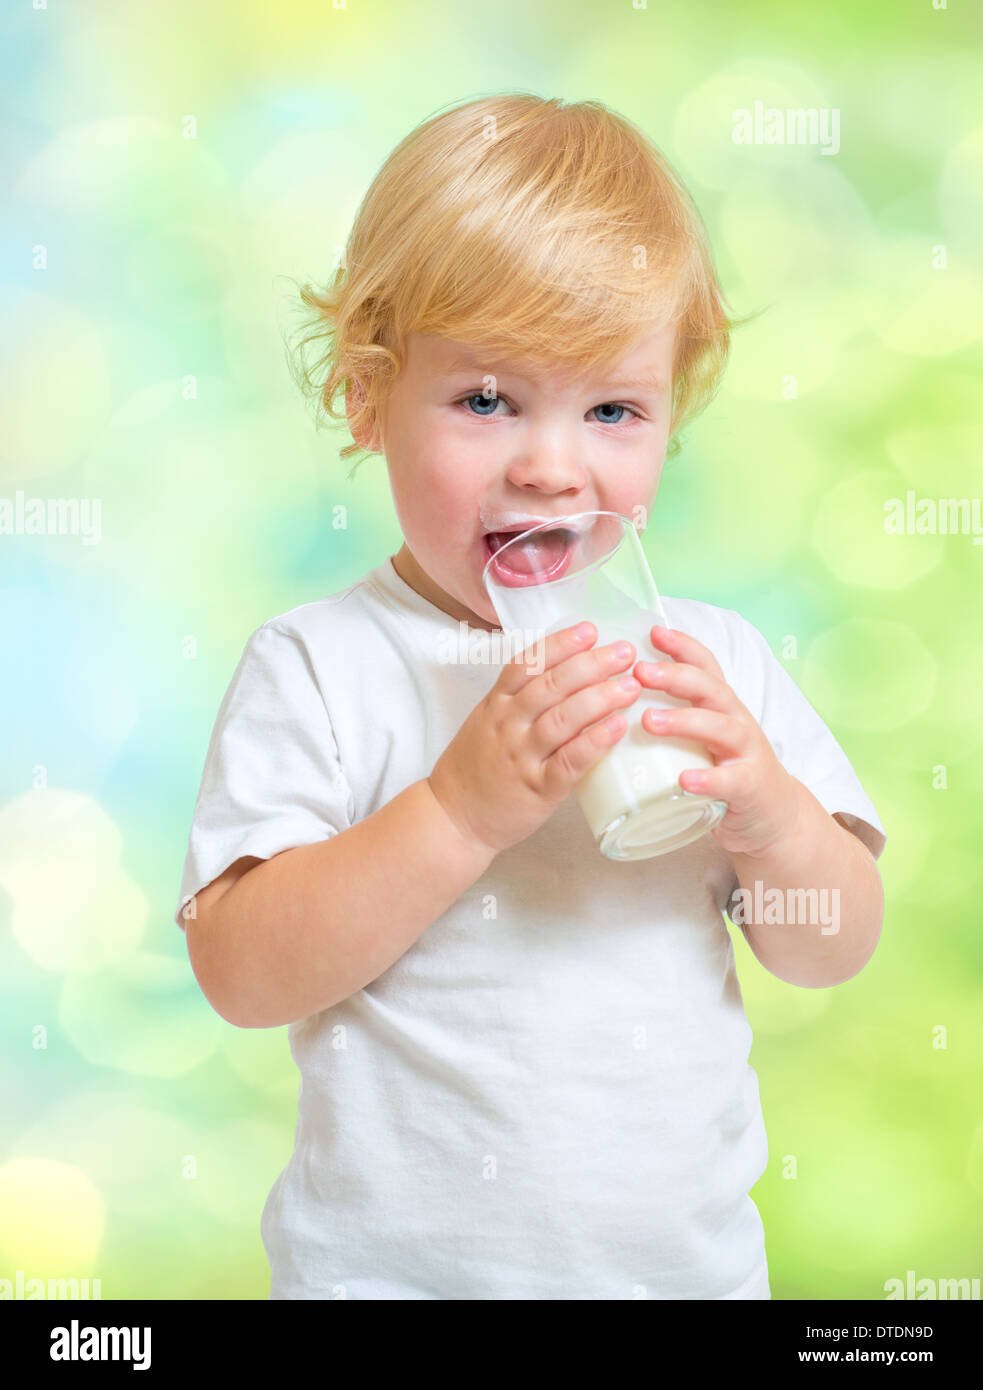 Child drinking dairy product from glass Stock Photo